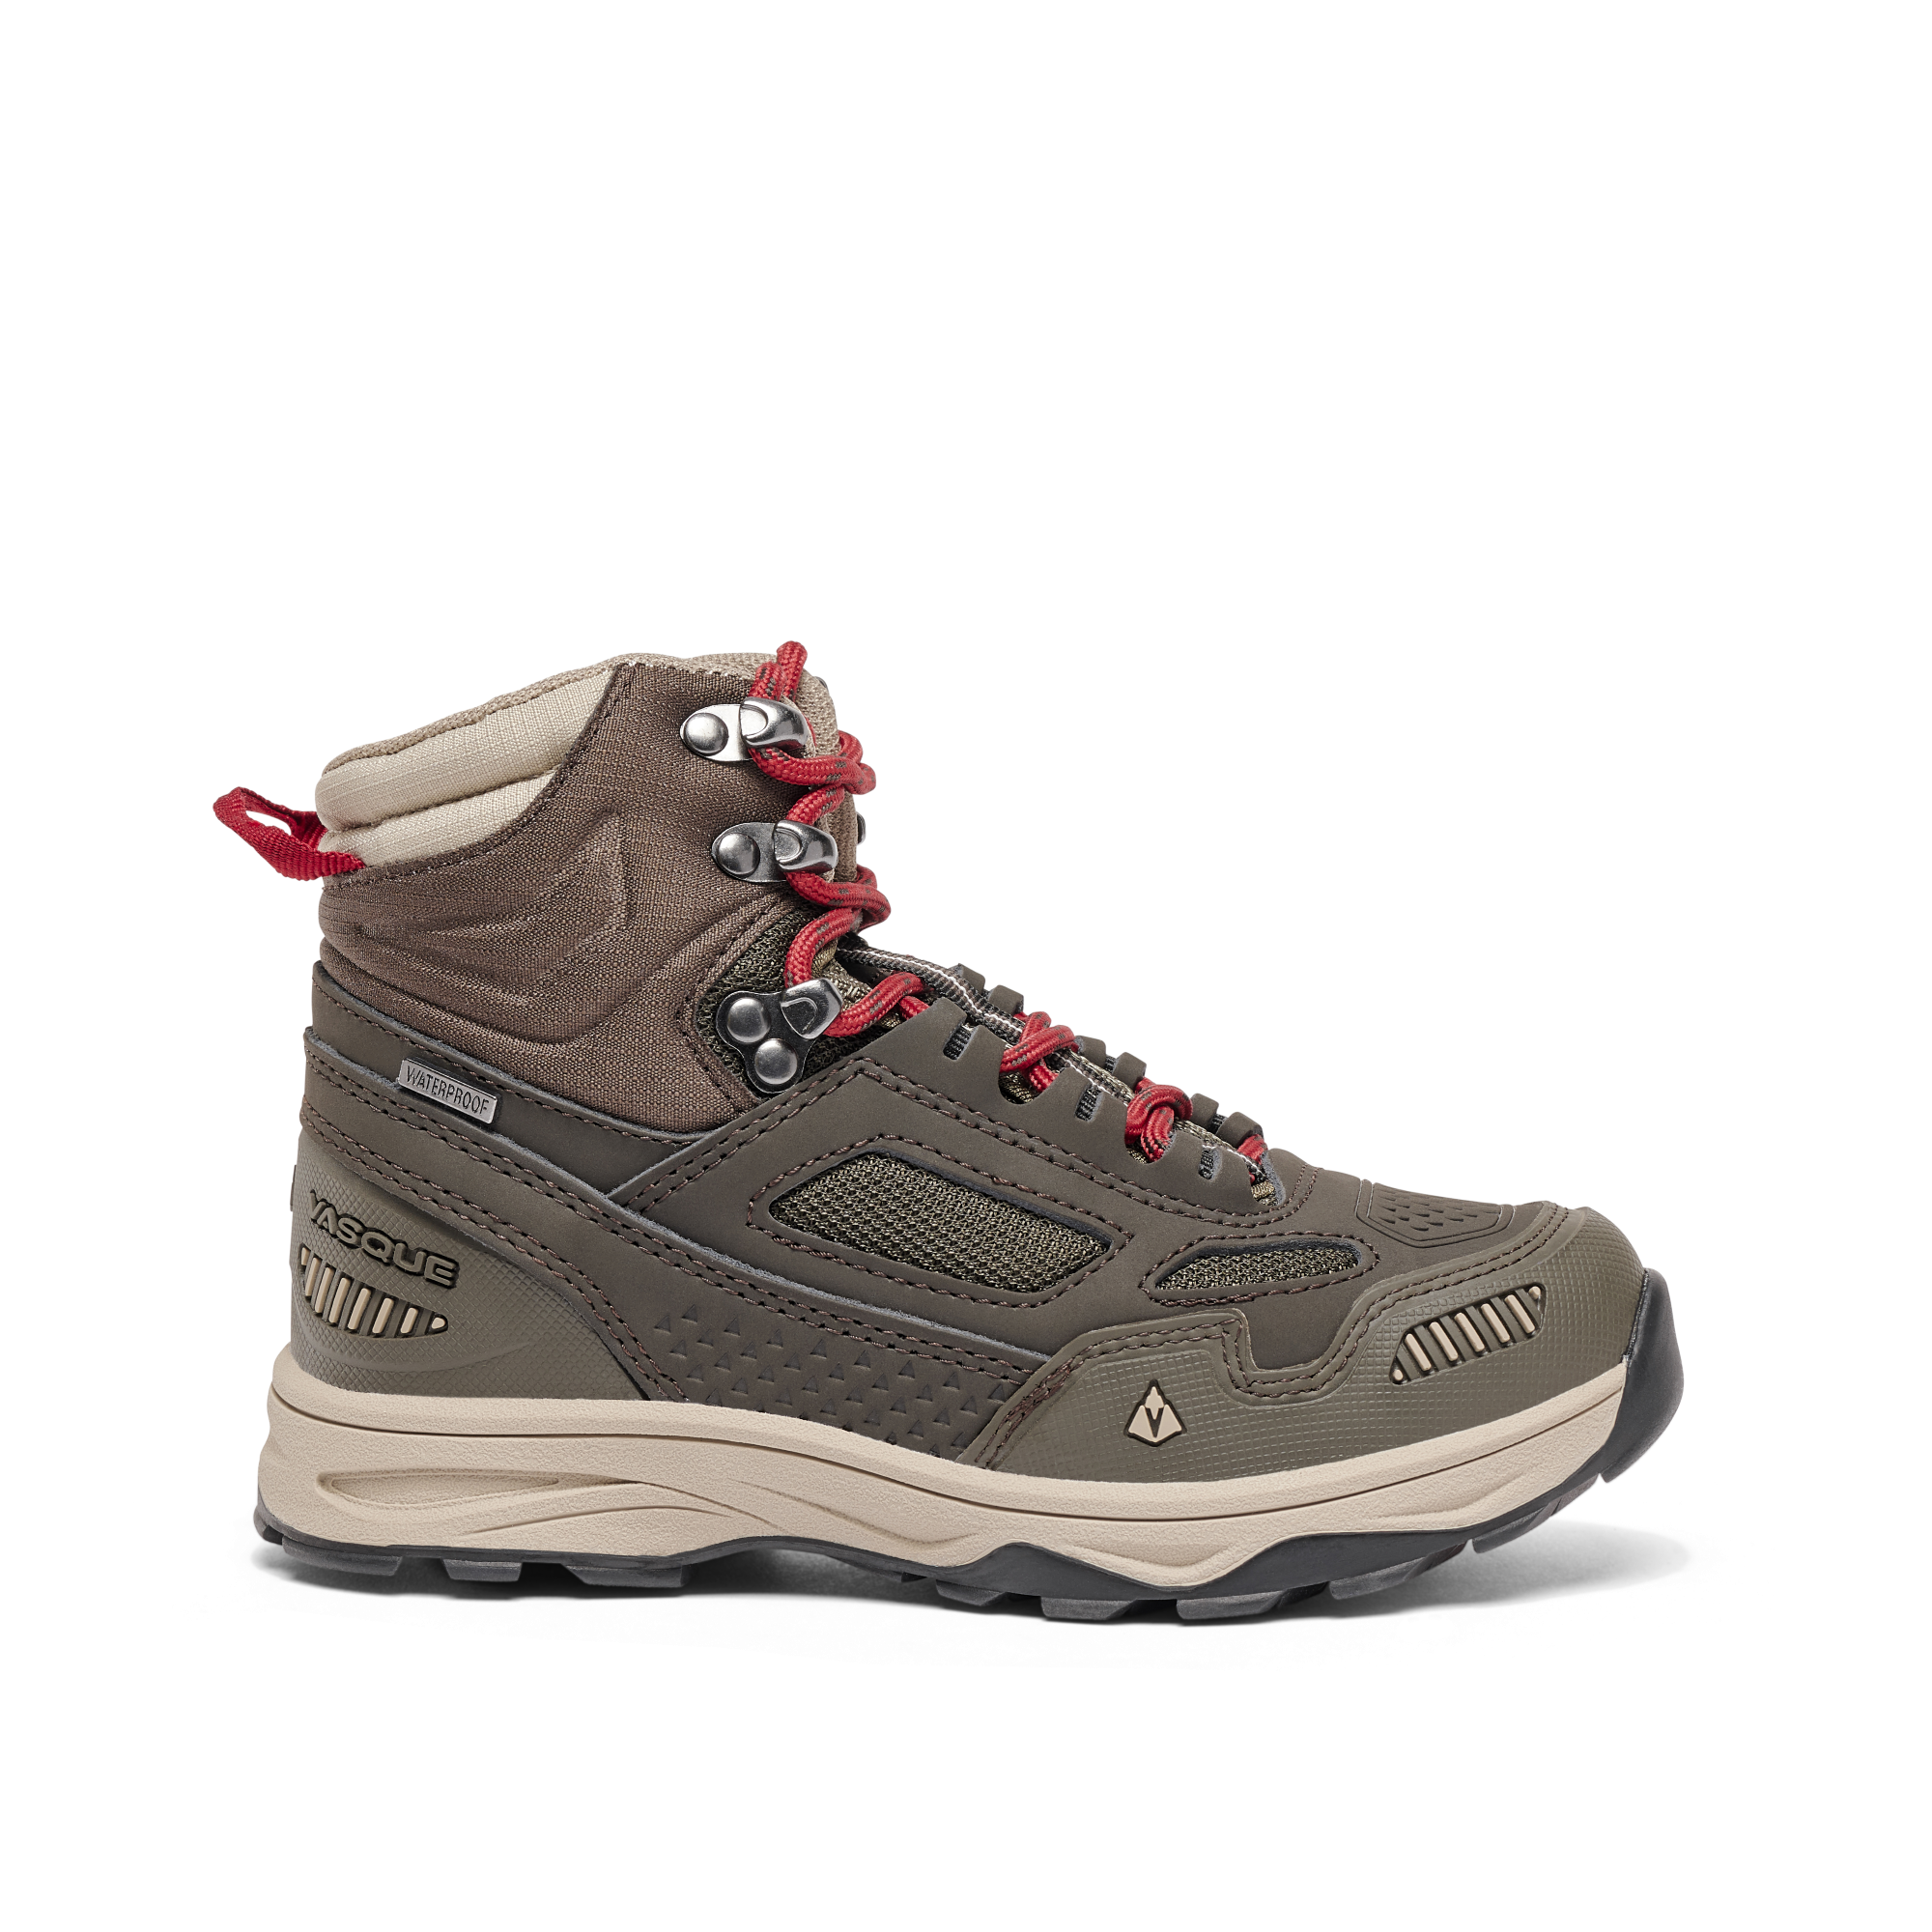 Vasque Breeze AT UltraDry Waterproof Hiking Boots for Kids - Olive - 11 Kids